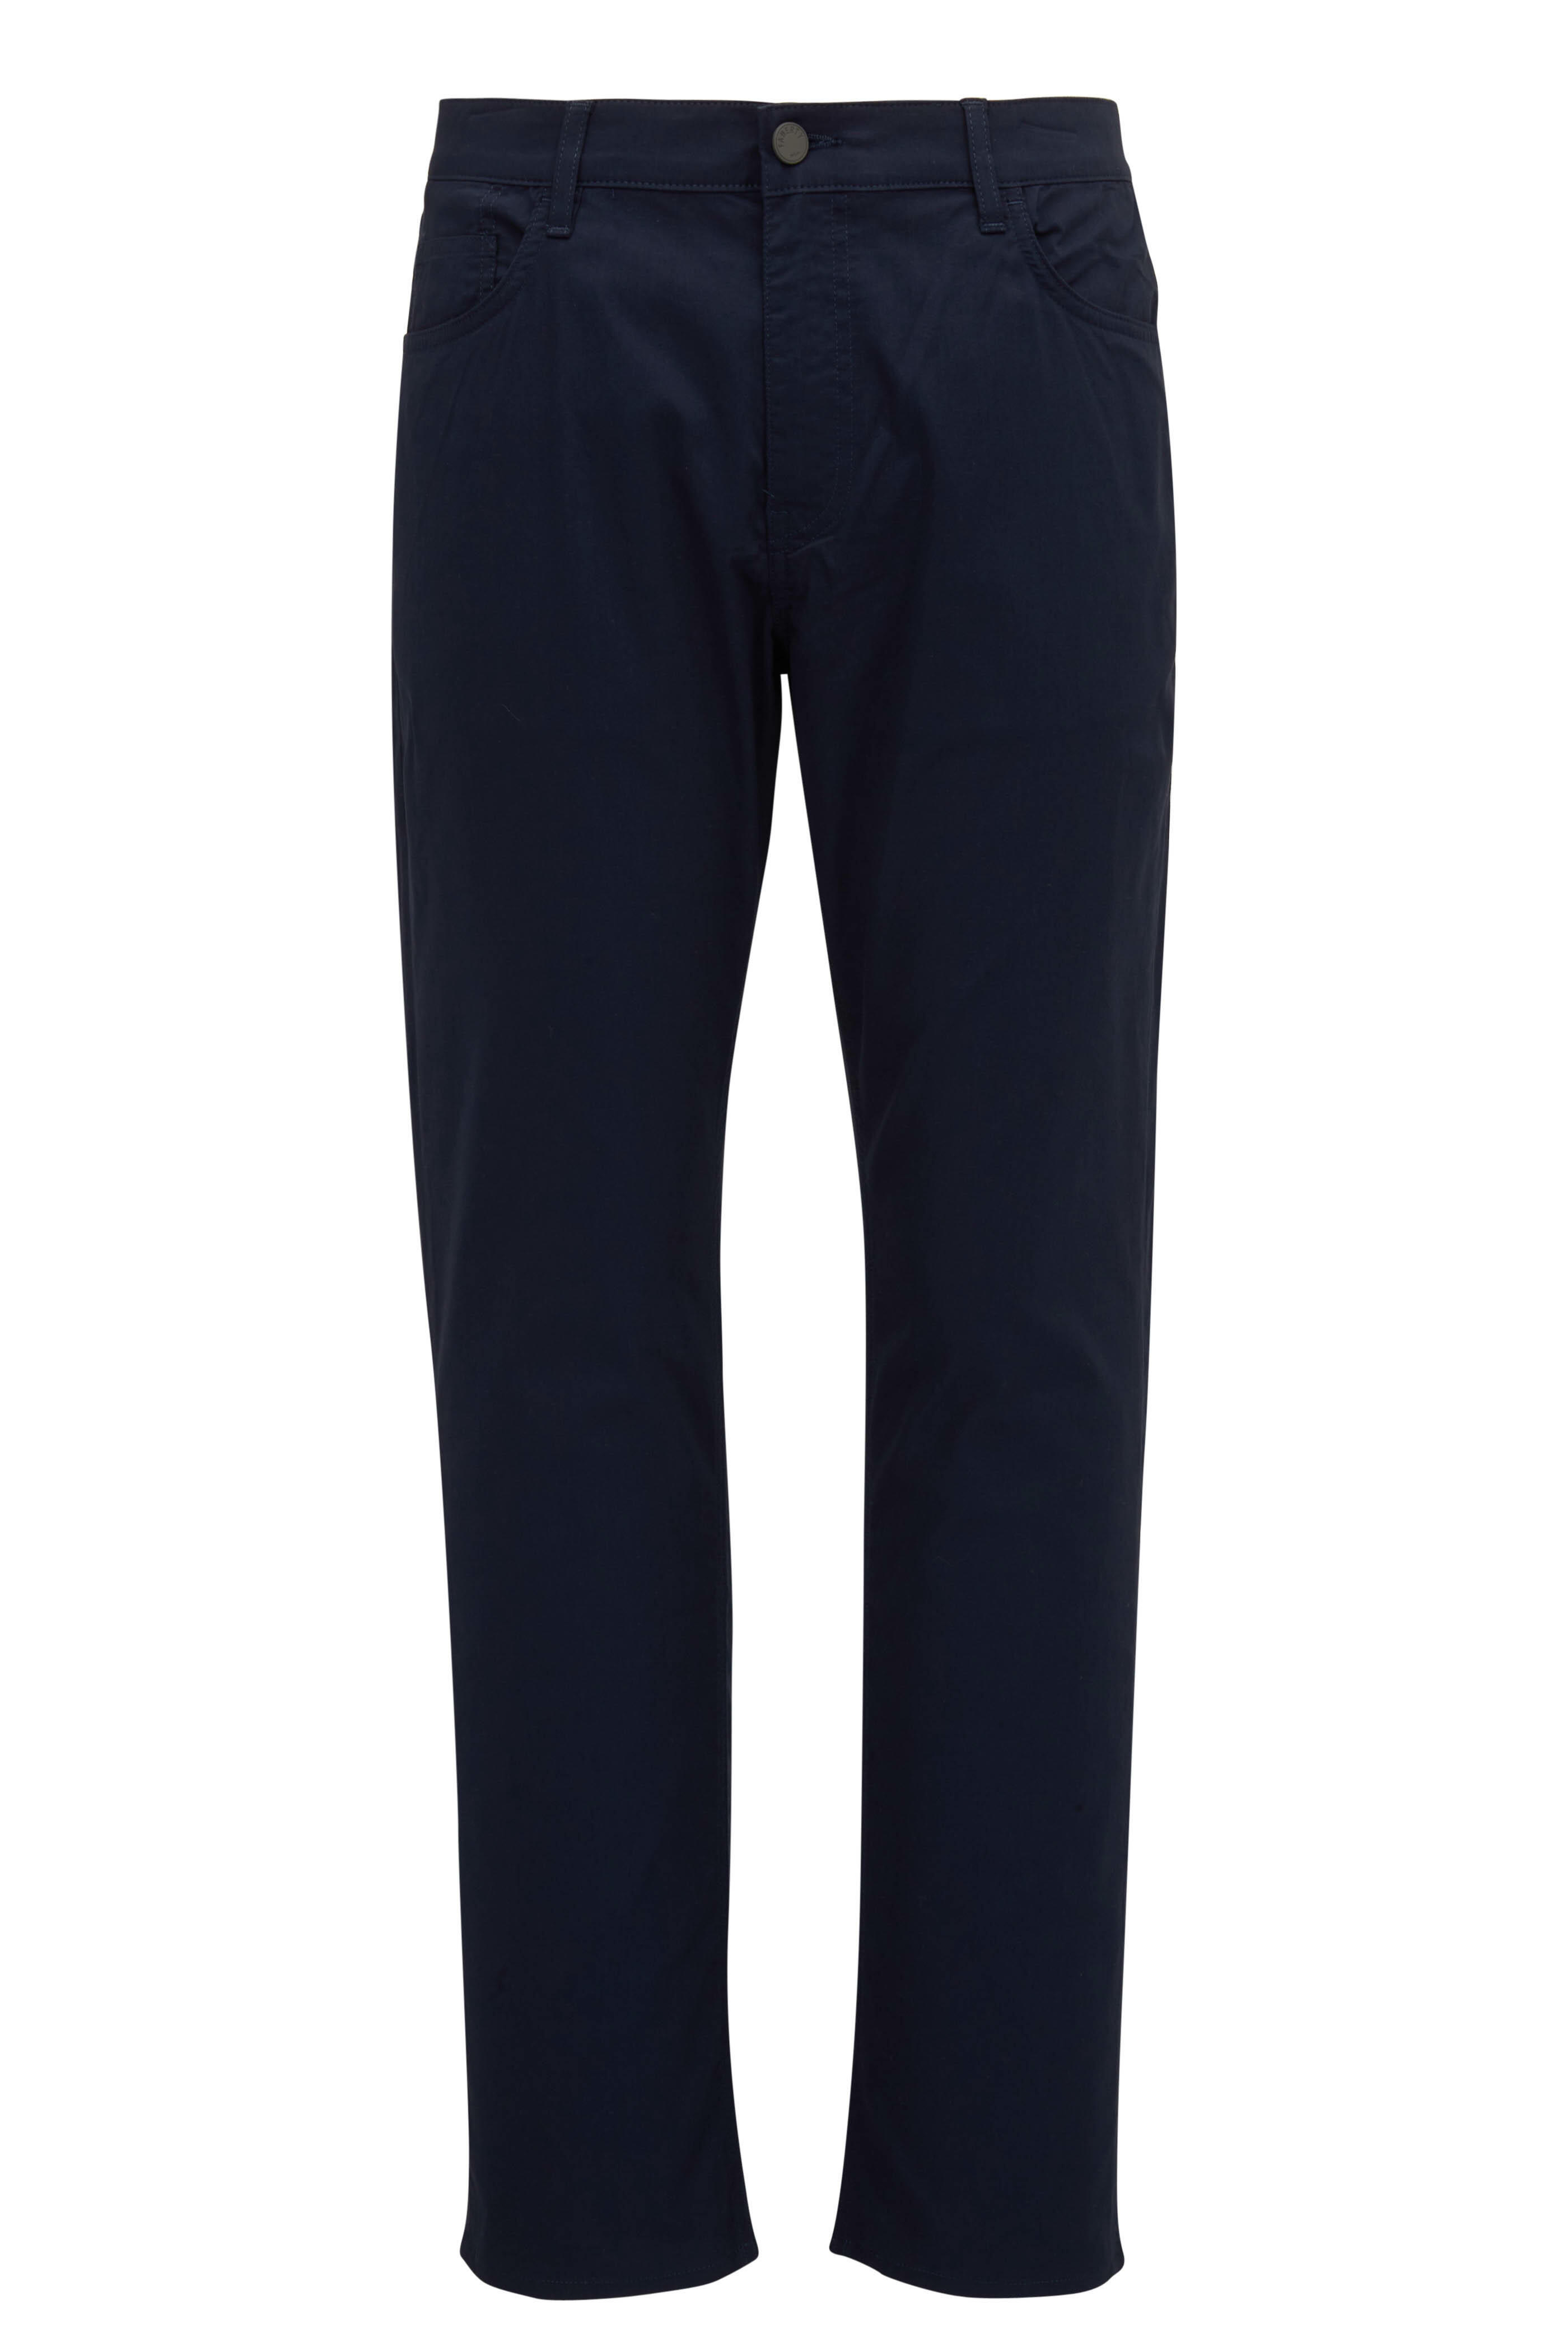 Faherty Brand - Movement™ Navy Five-Pocket Pant | Mitchell Stores